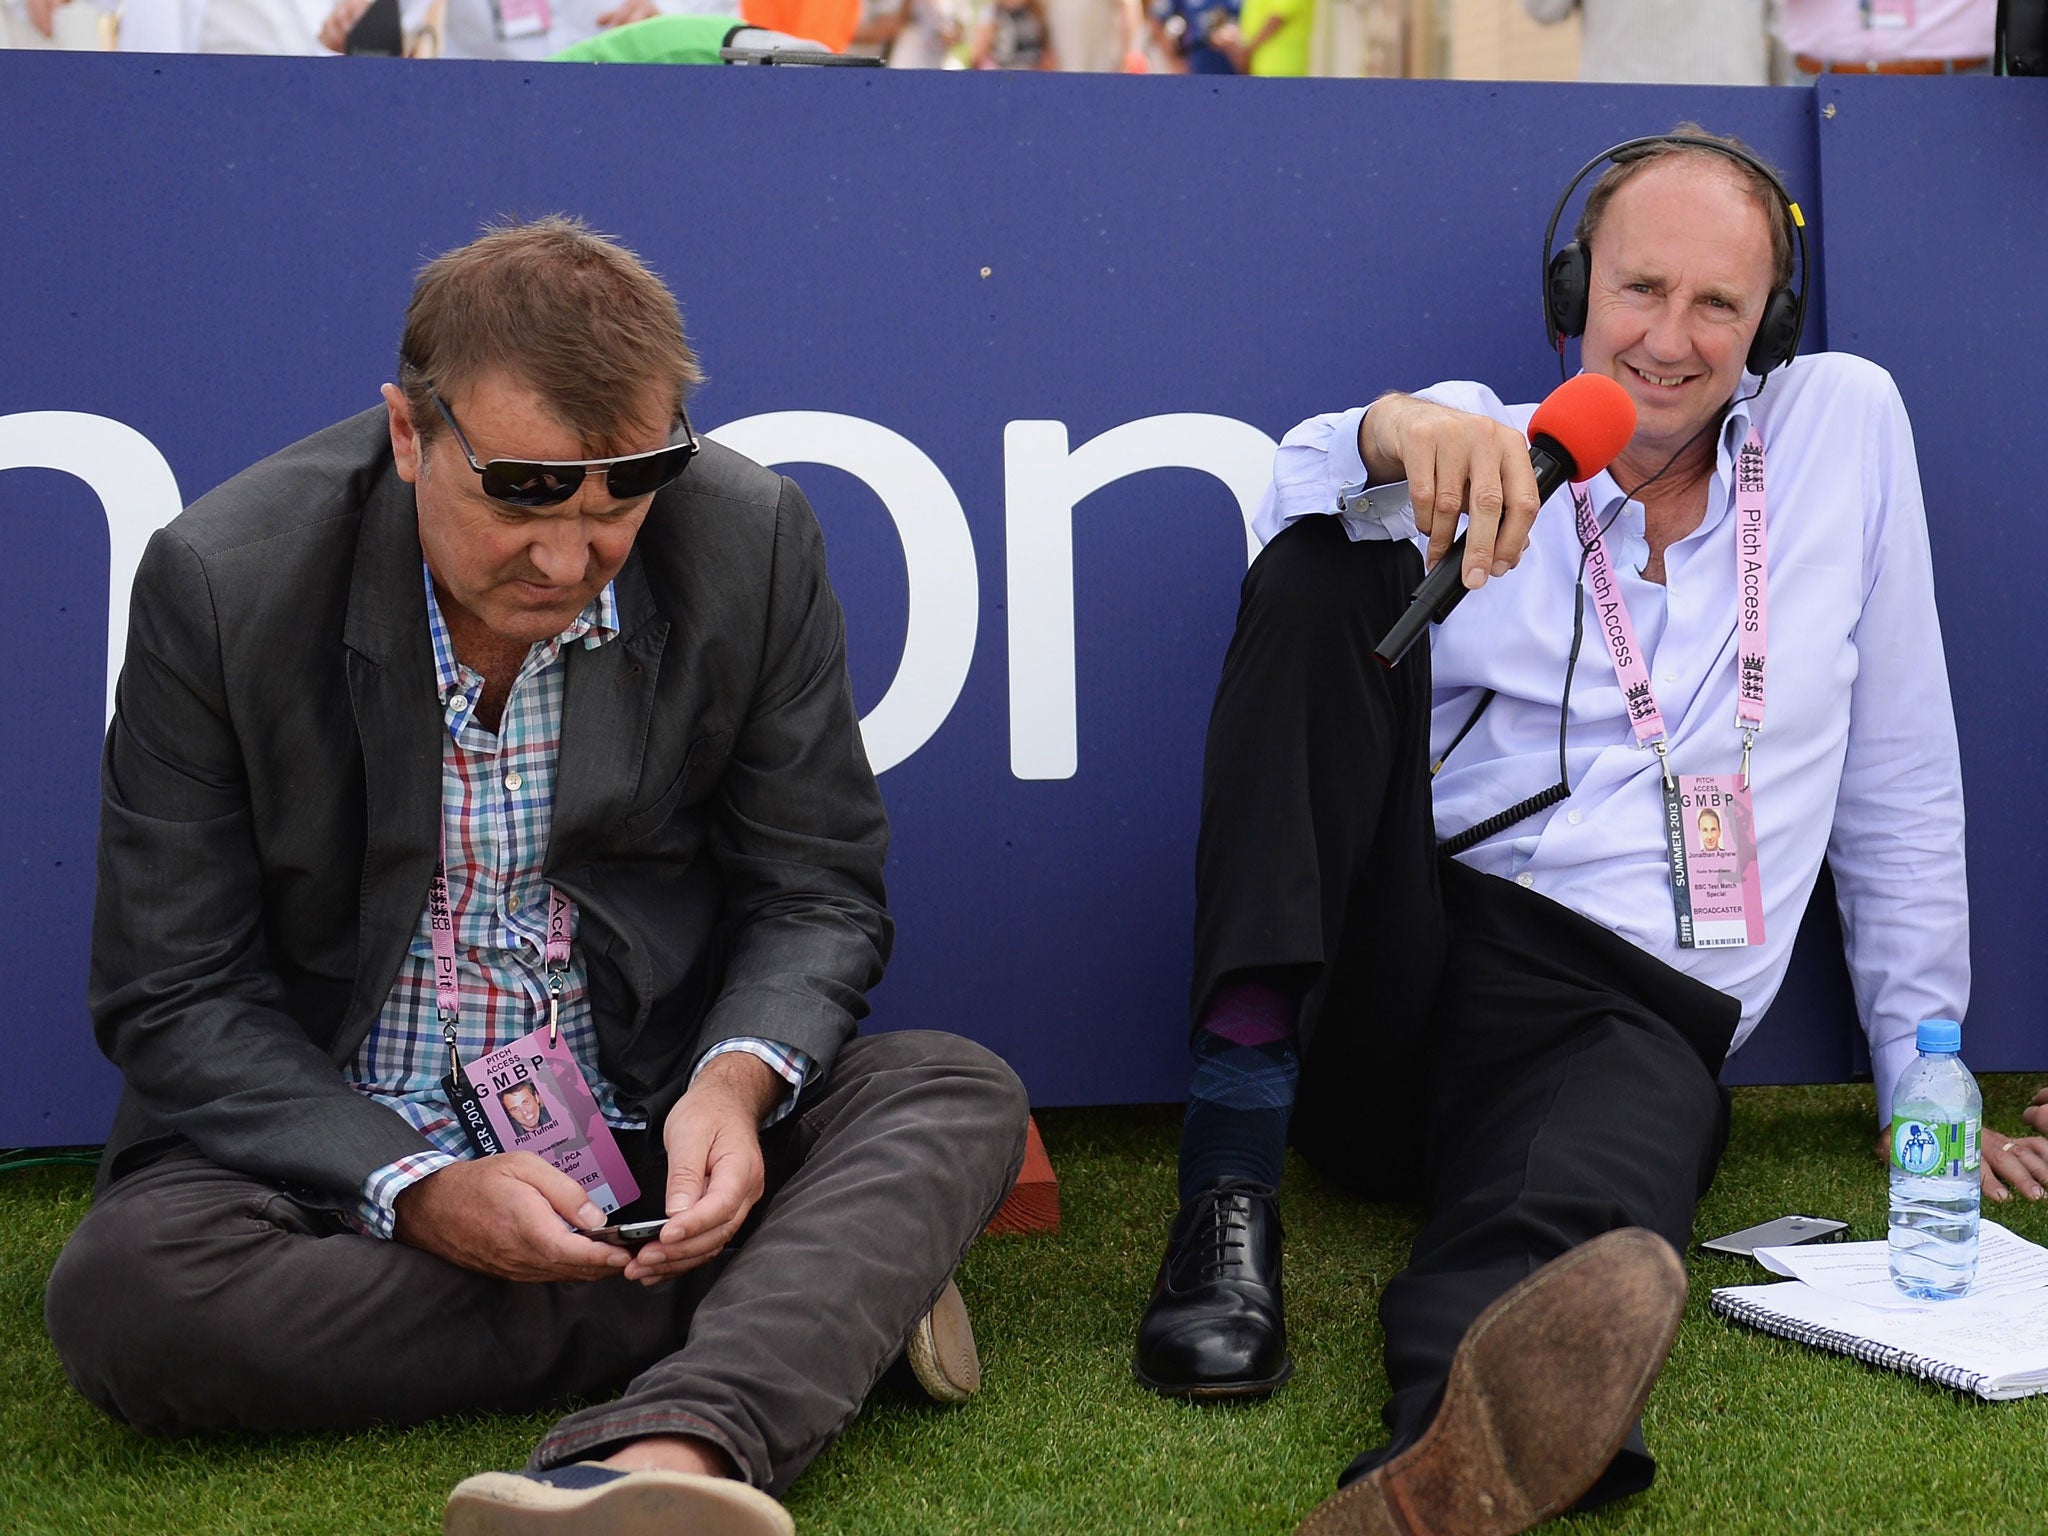 Test Match Special broadcasters Phil Tufnell and Jonathan Agnew